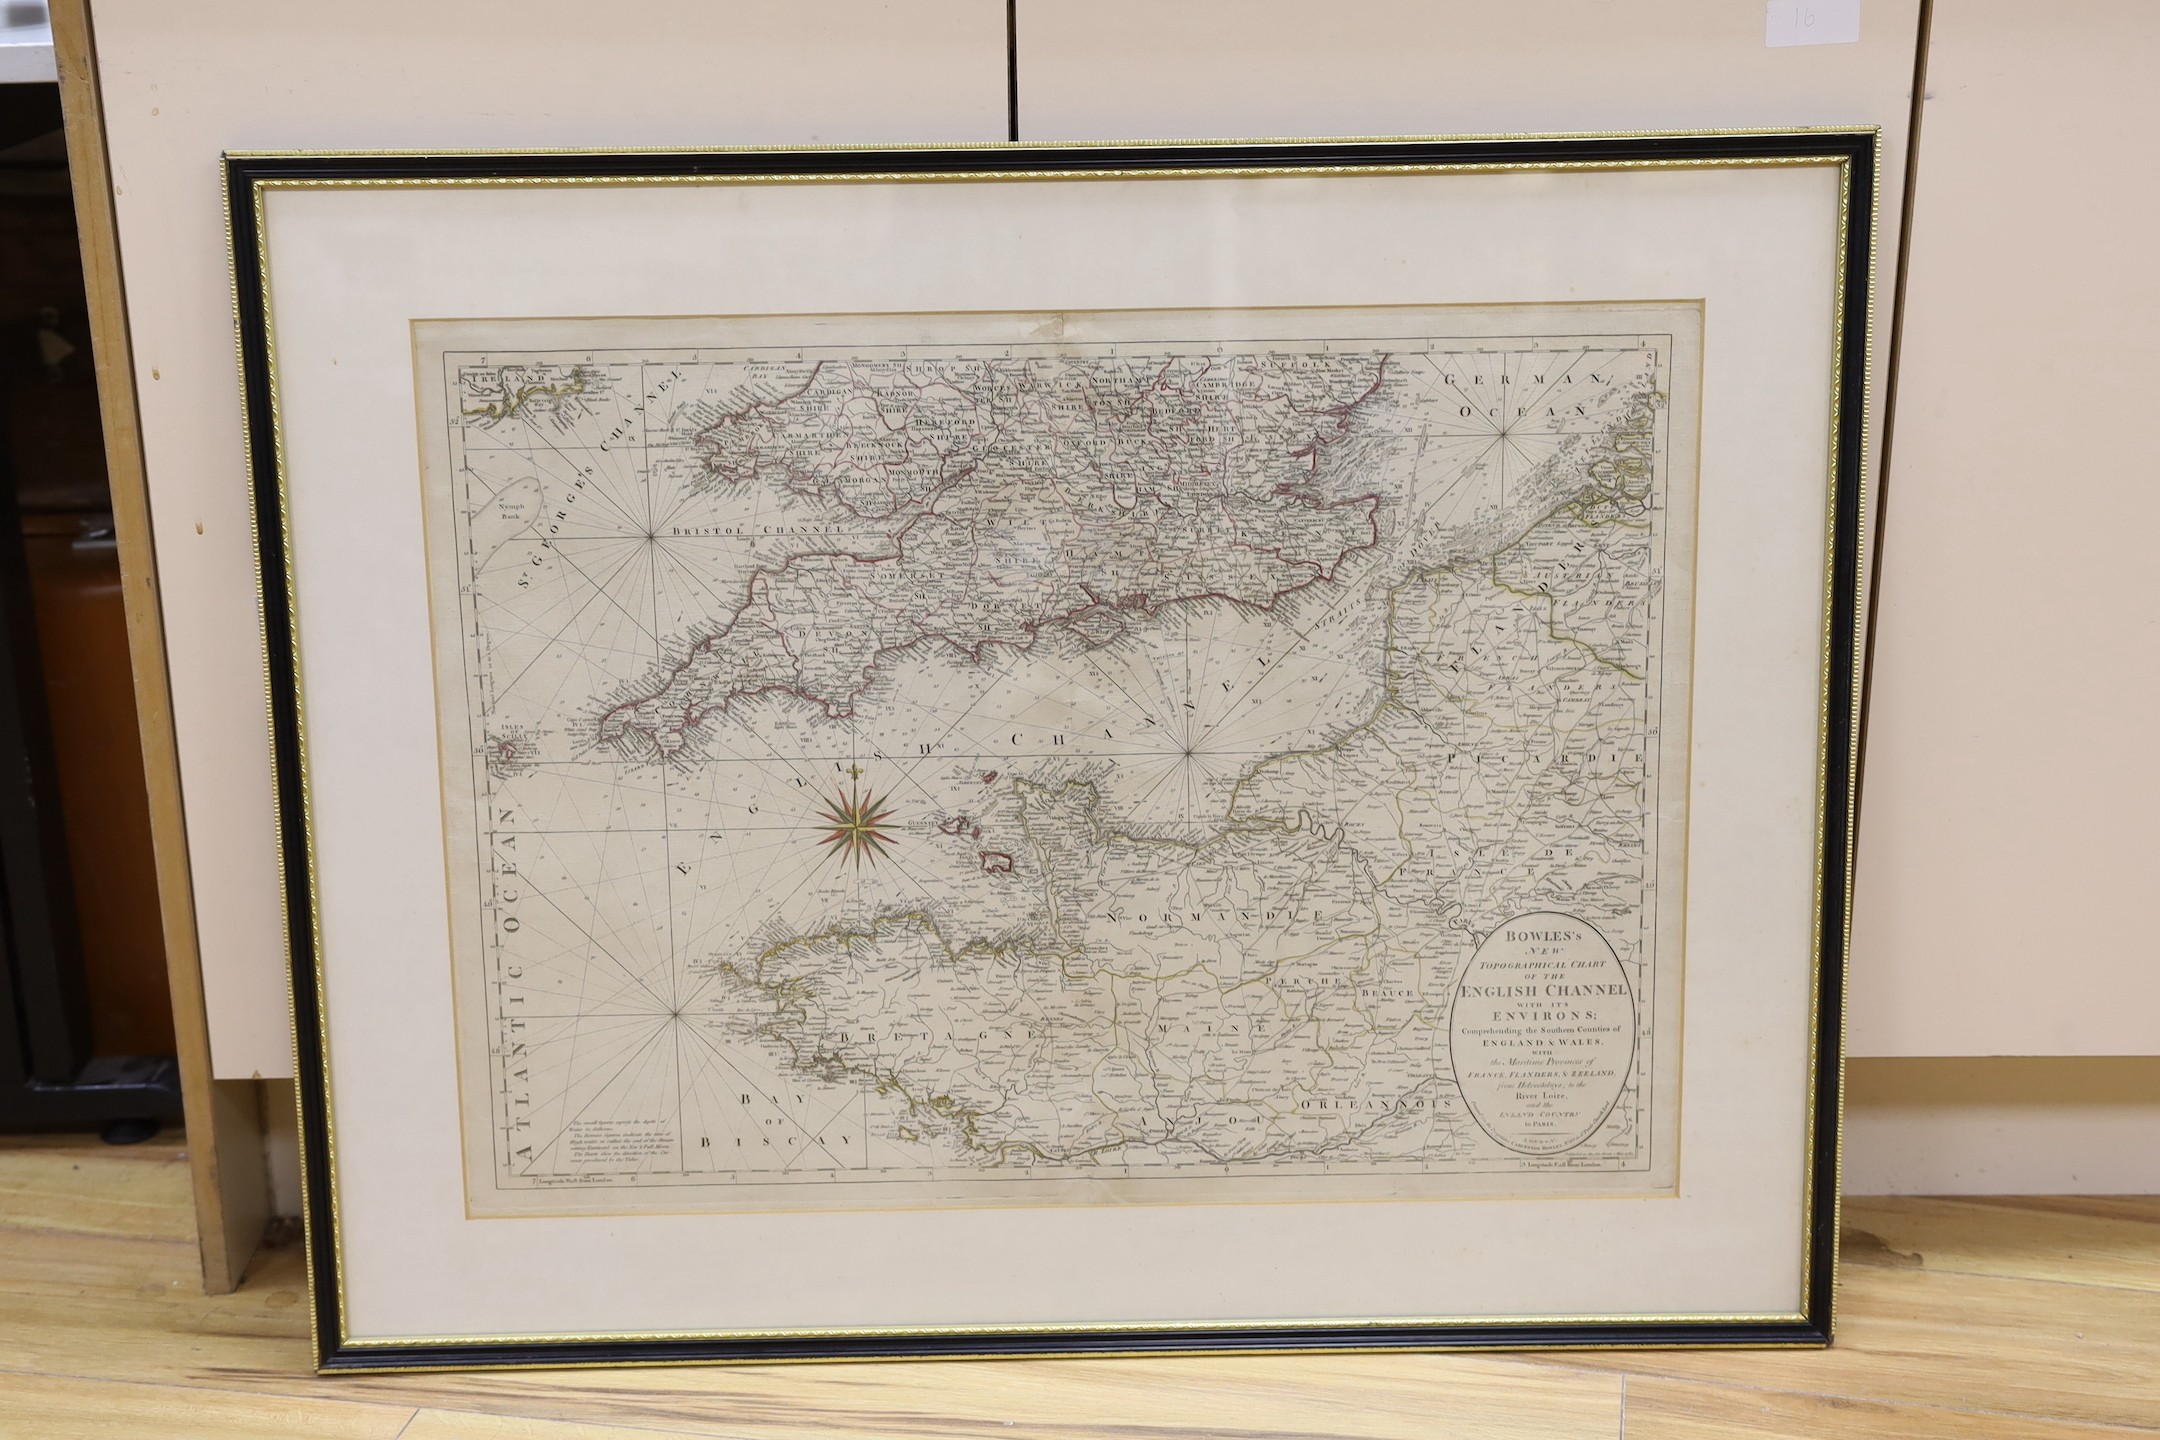 Carington Bowles, hand coloured engraving, Topographical Chart of the English Channel with it’s Environs, 53 x 72cm